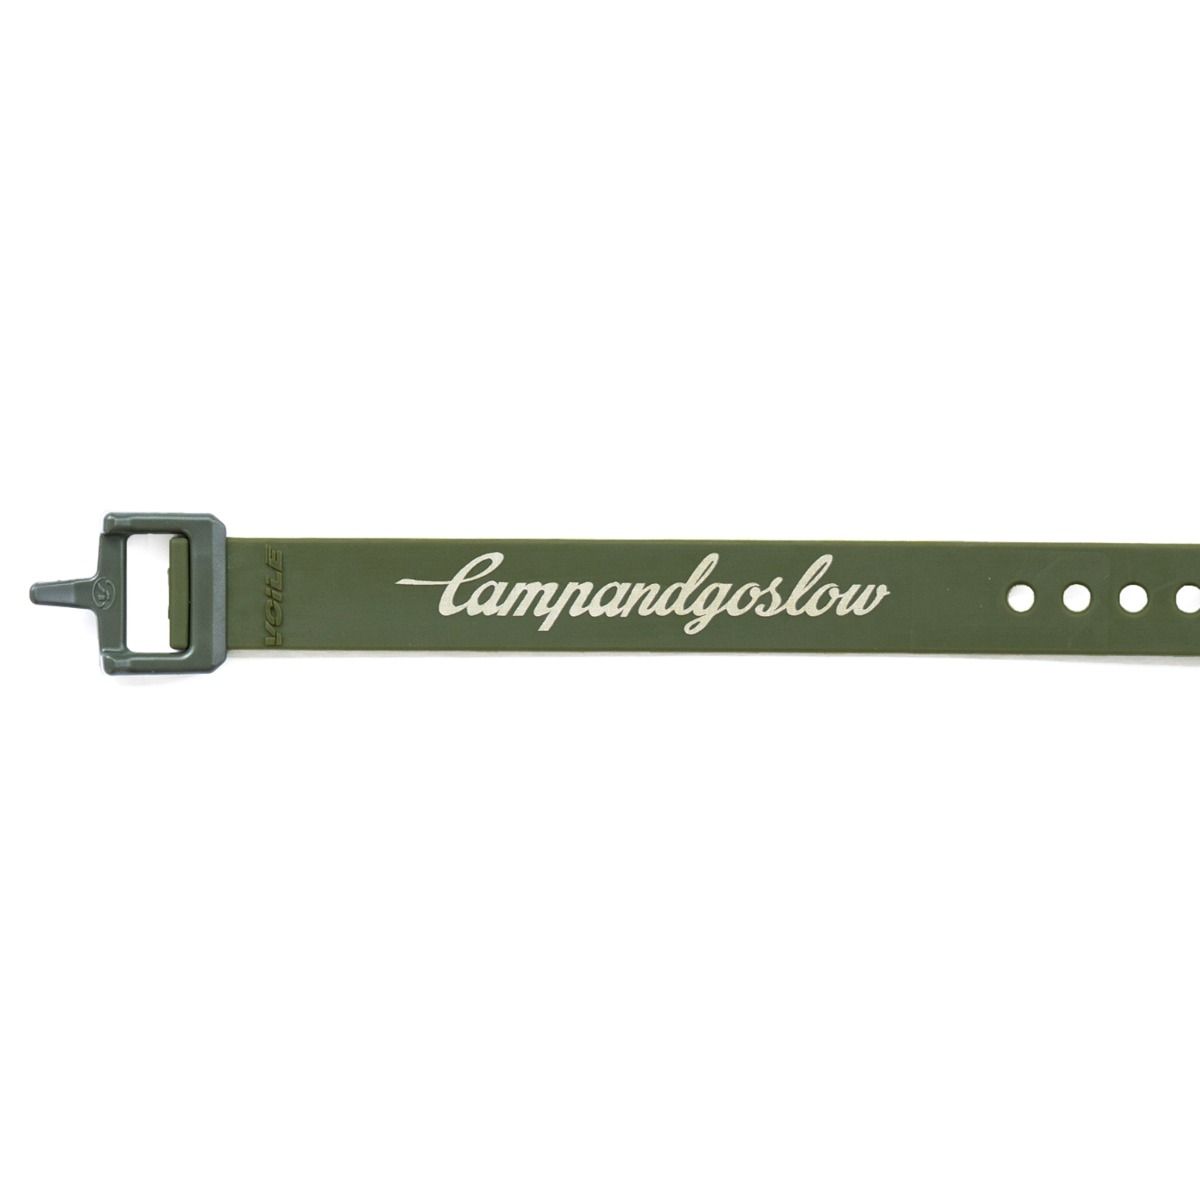 *CAMP AND GO SLOW* 15inch voile strap (olive green)